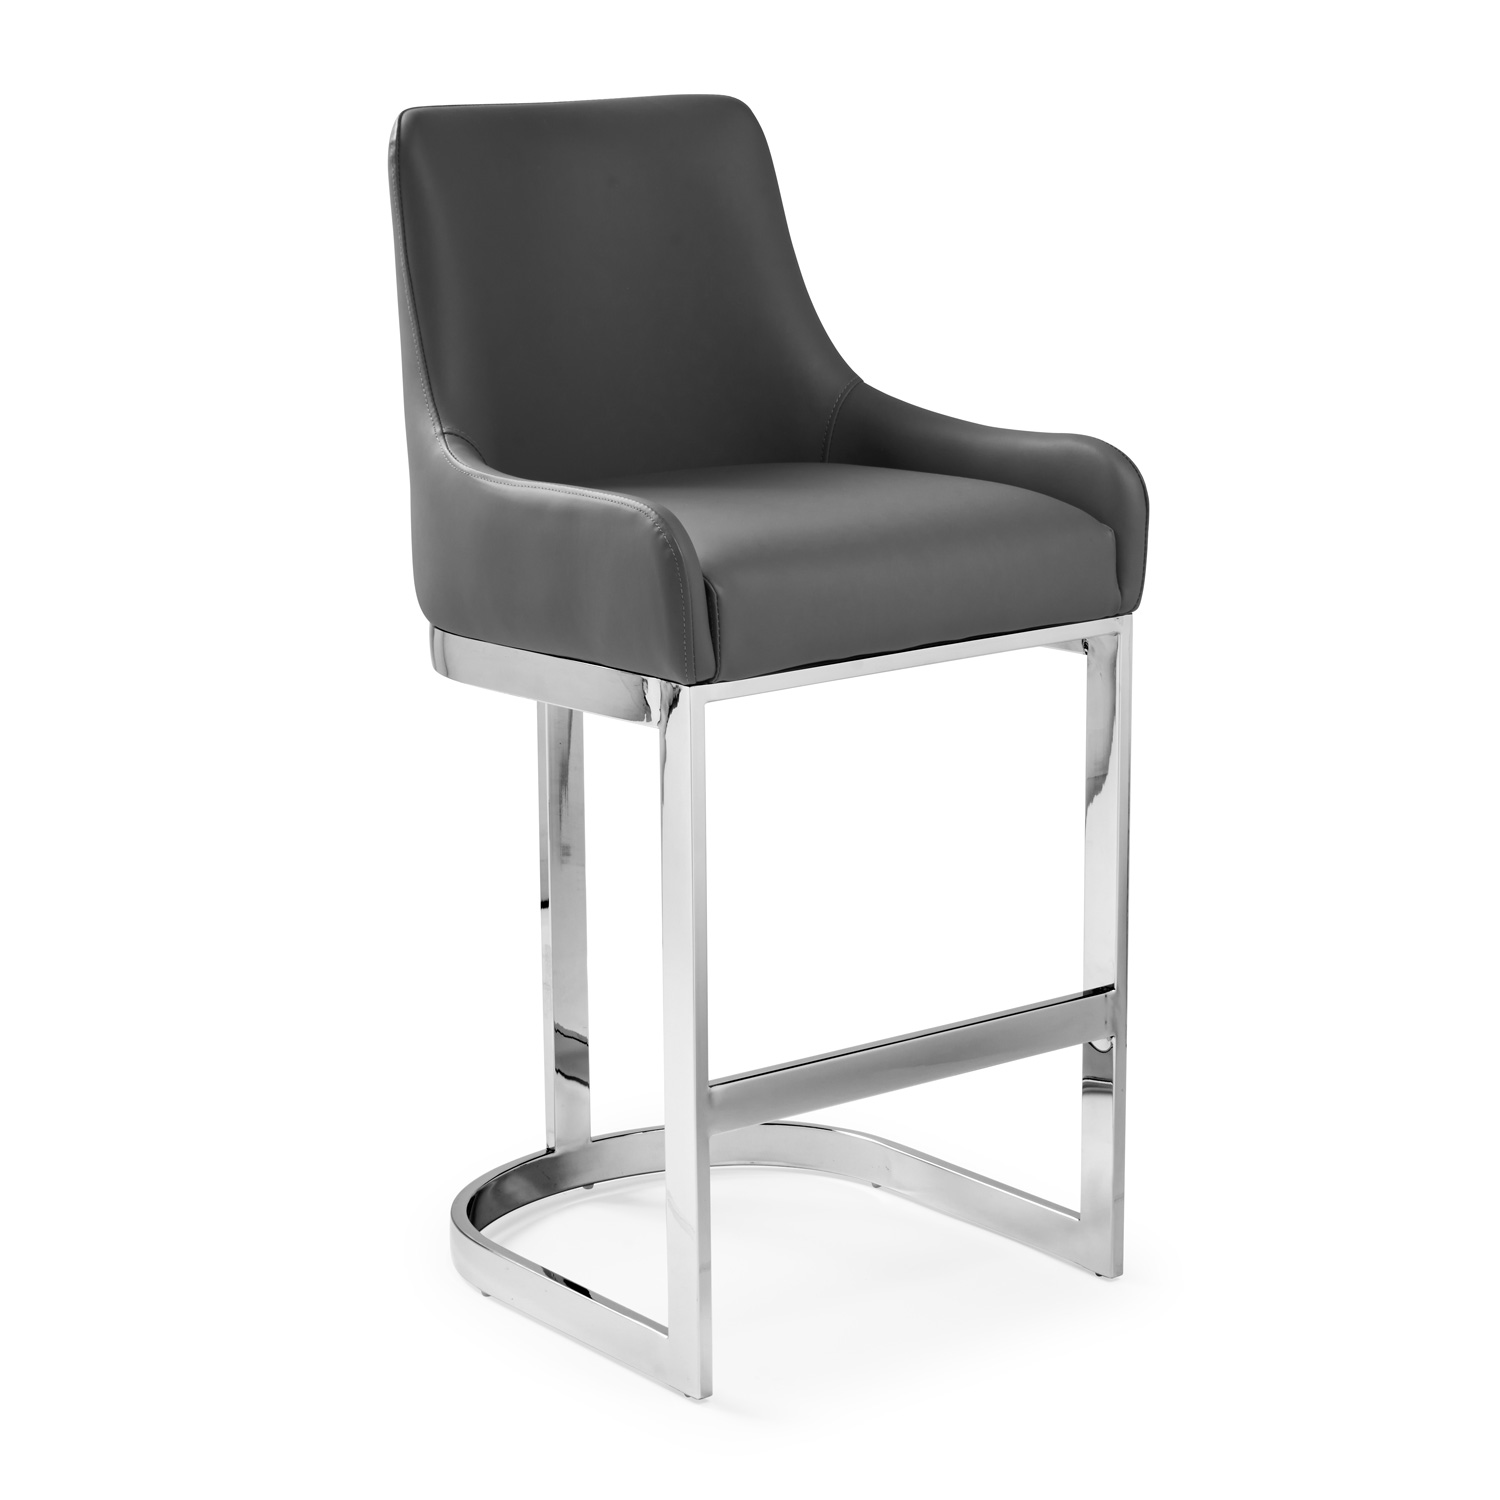 Clara Grey Faux Leather Kitchen Stool with a Stainless Steel Frame